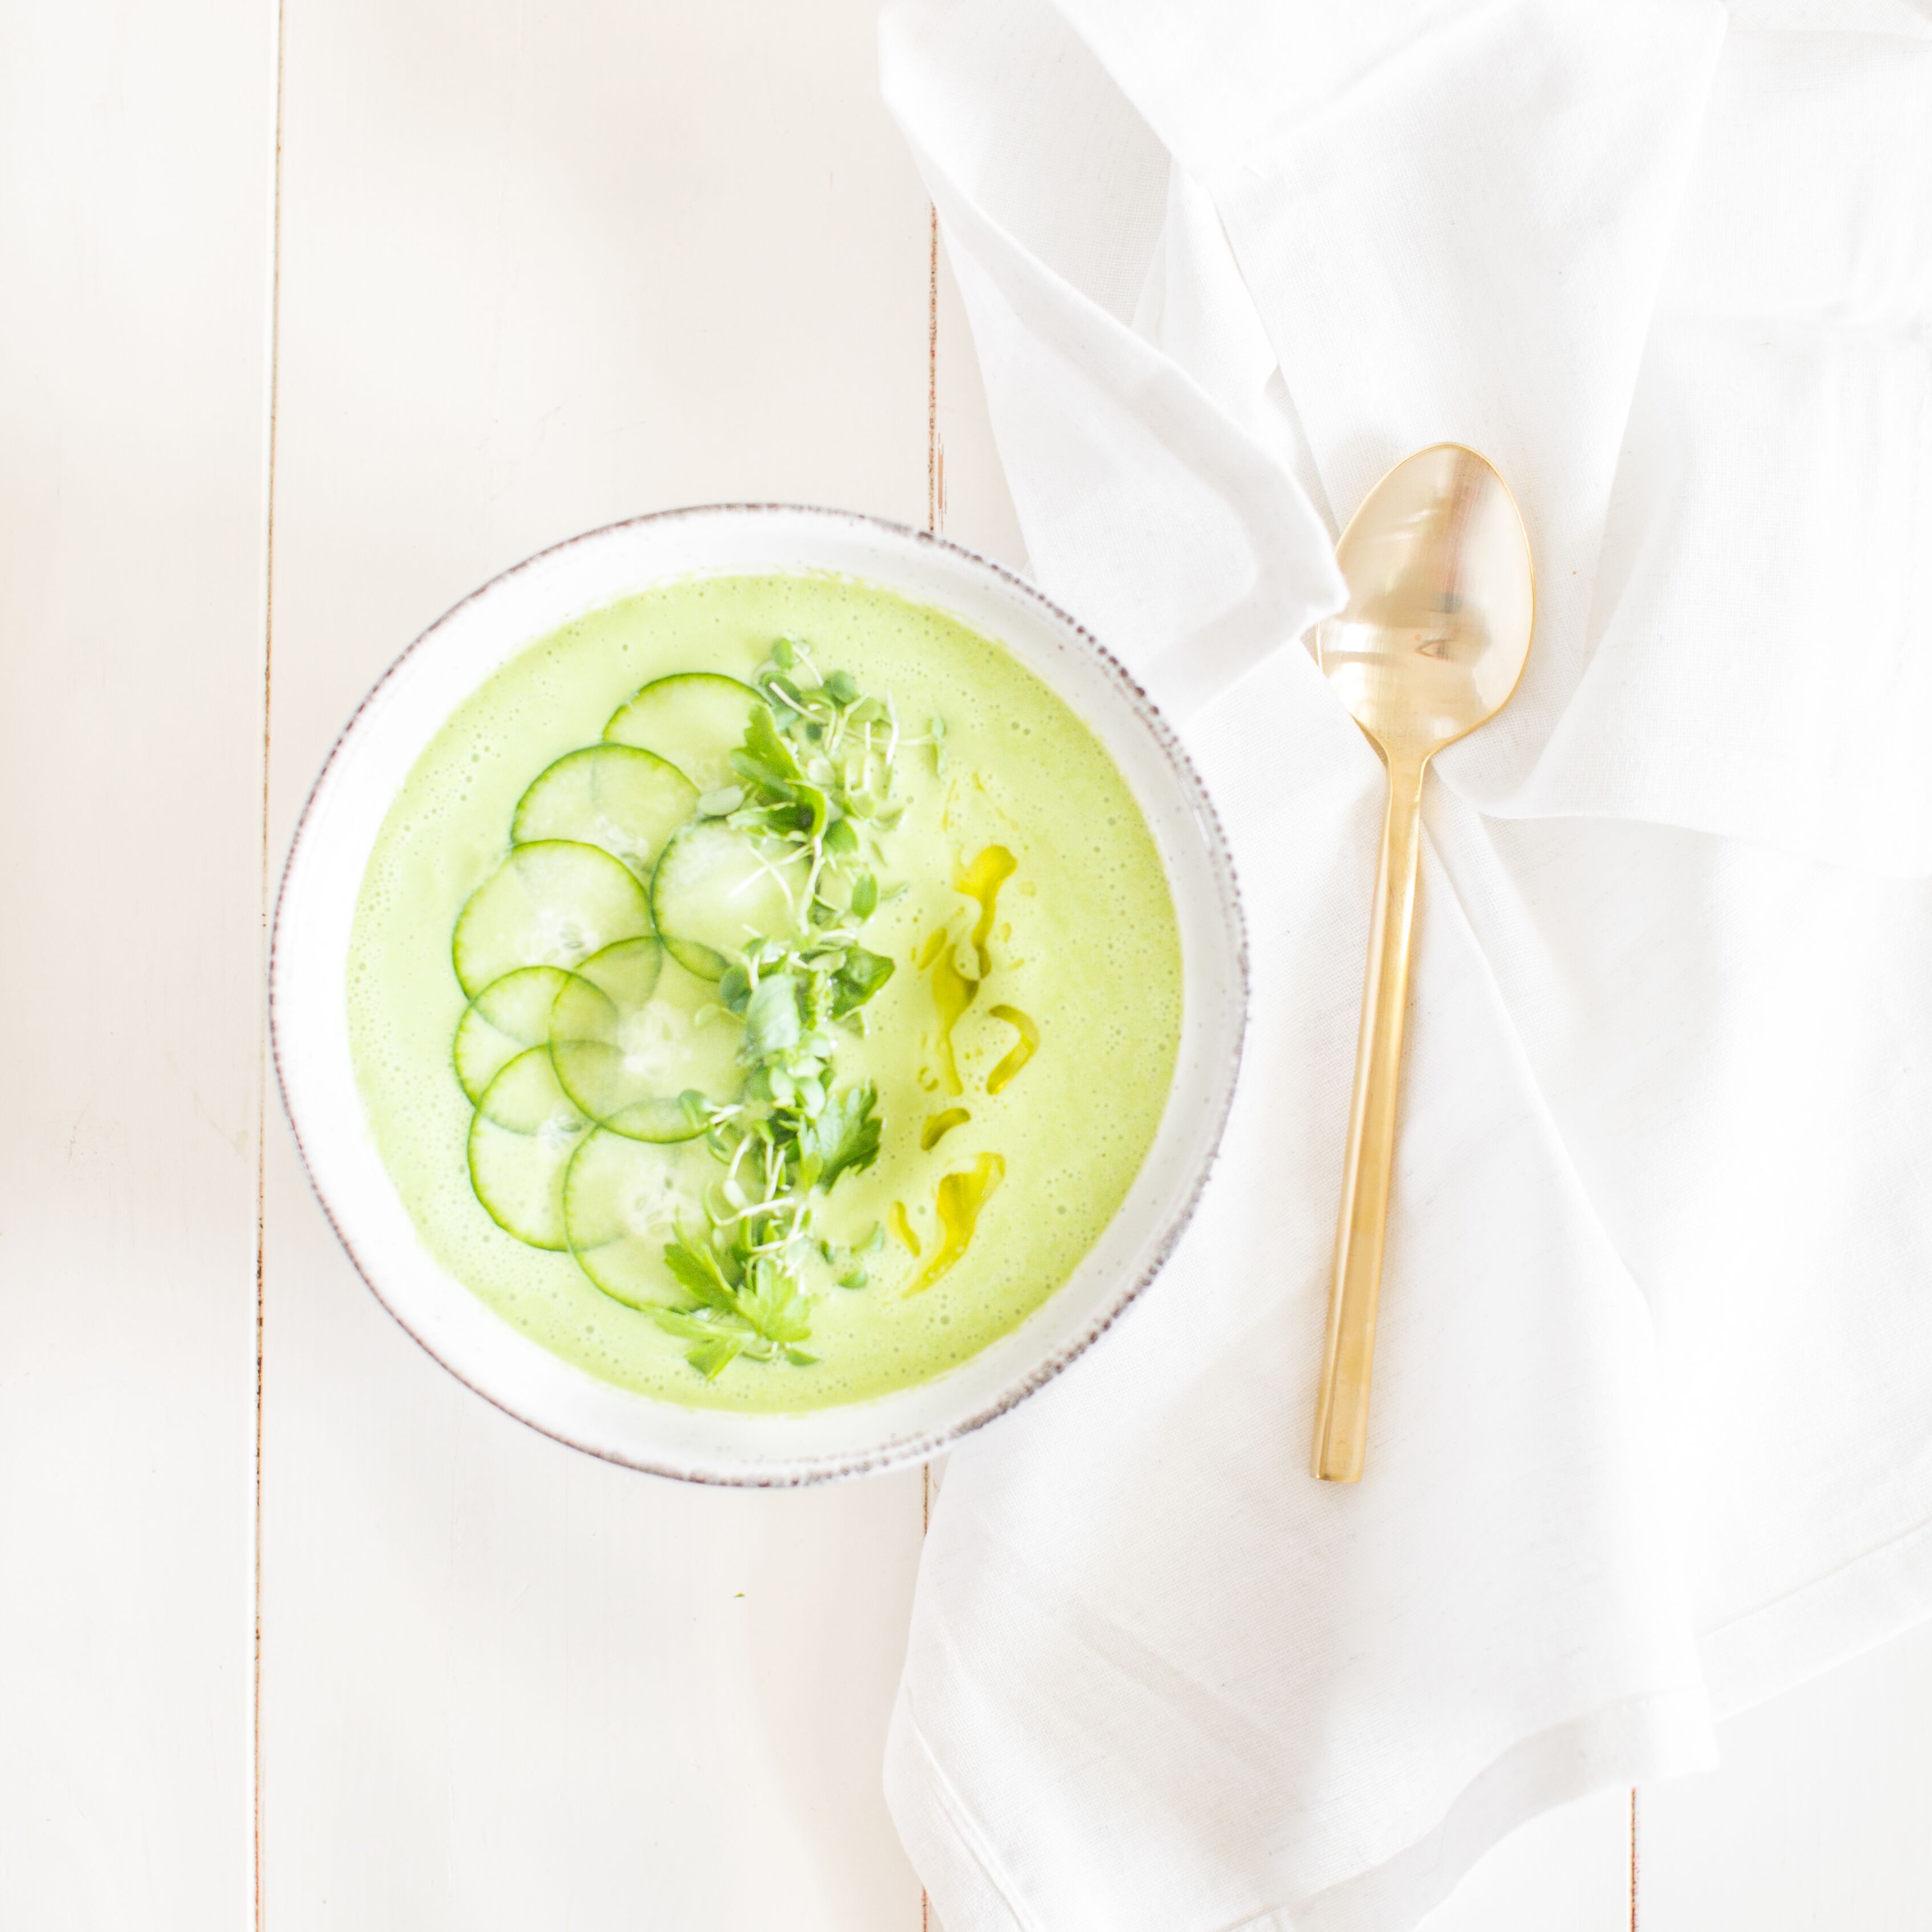 Green Gazpacho with cucumbers and micro greens - such a healthy cold soup for the summer!